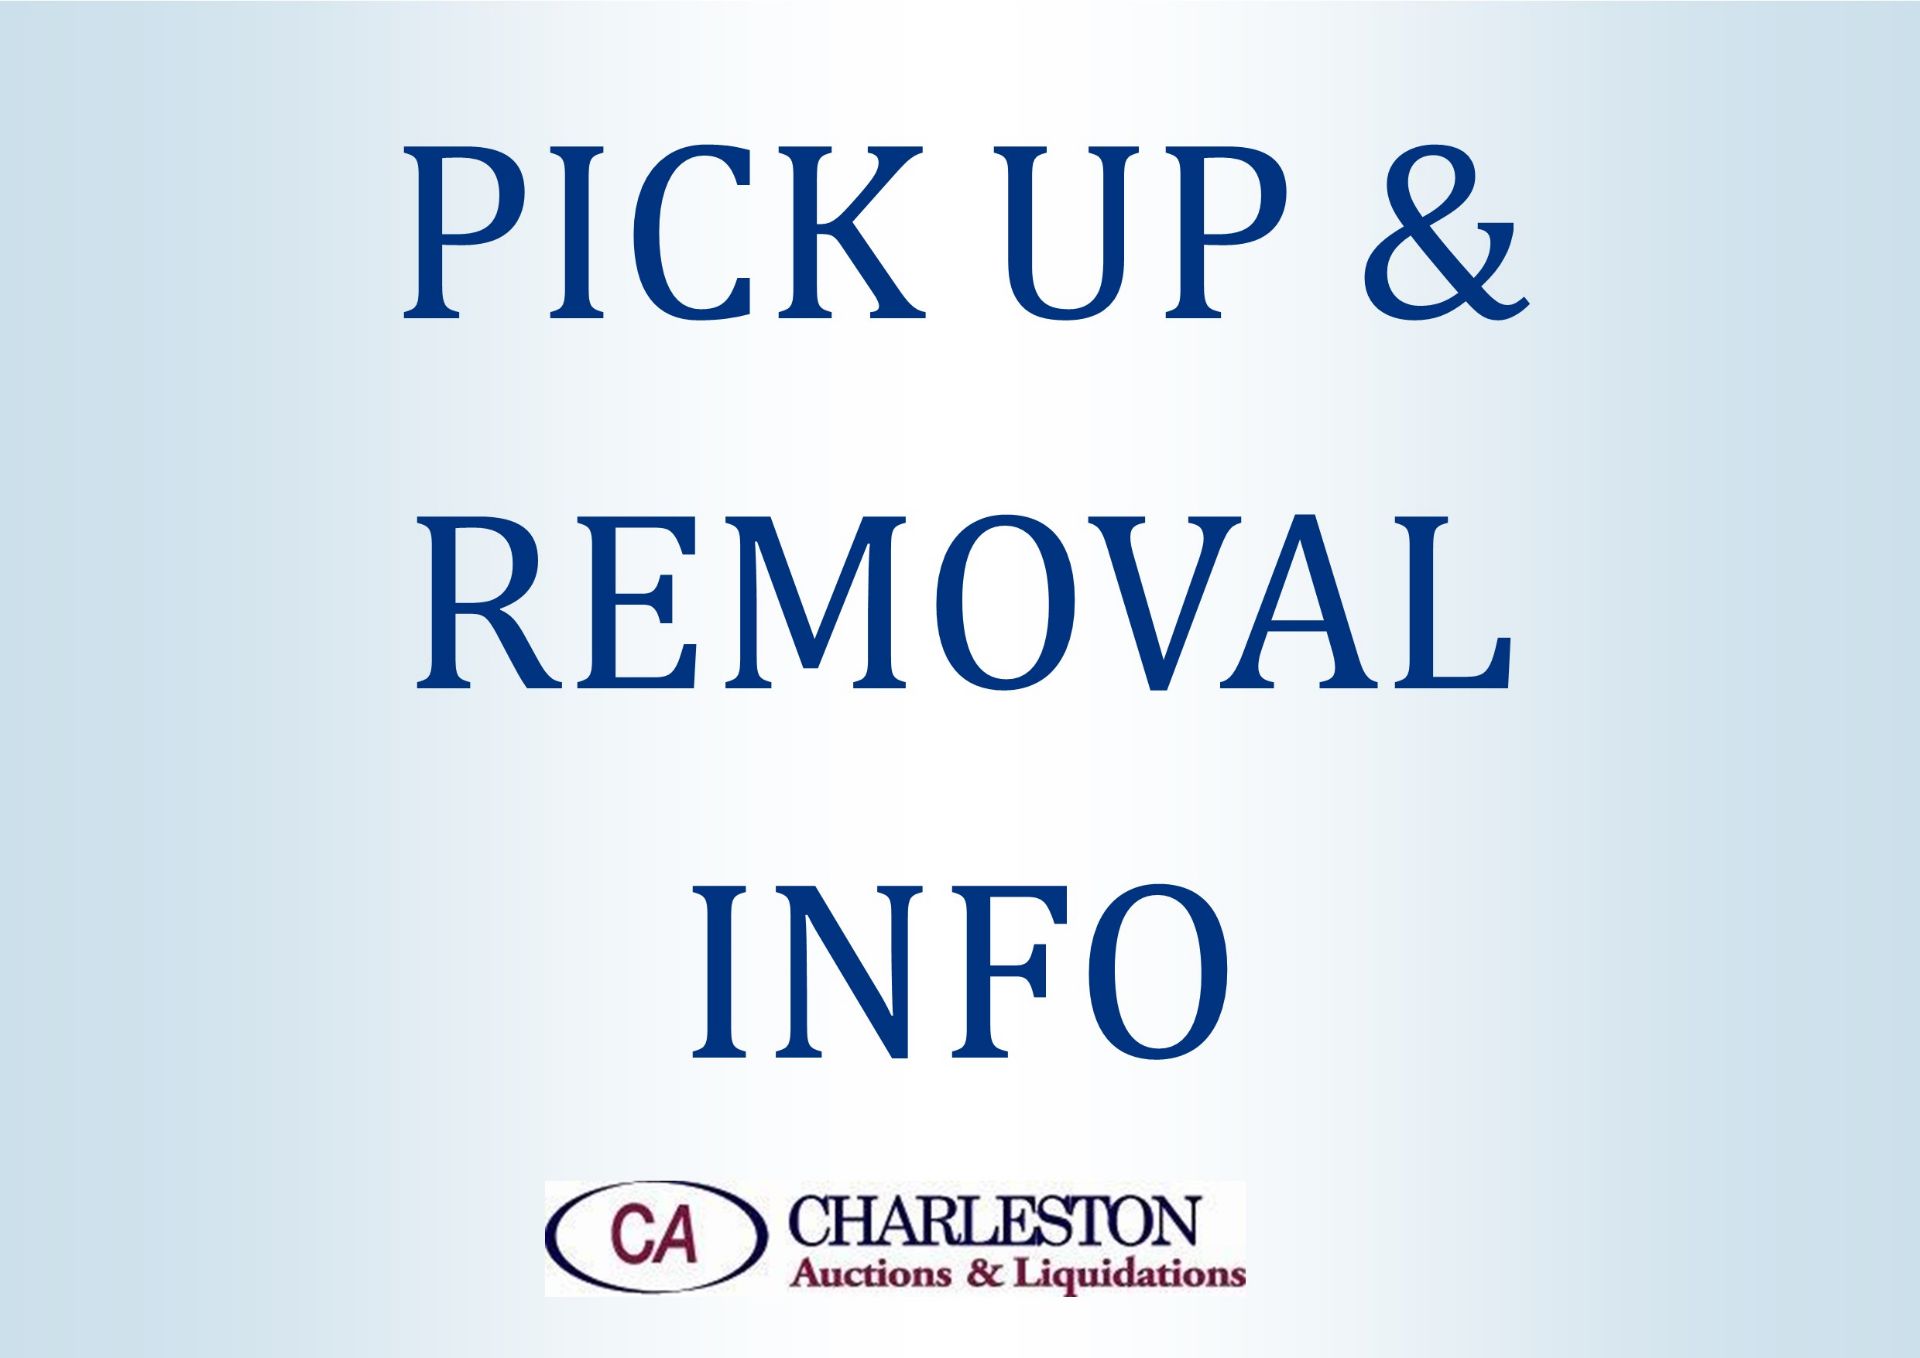 Removal is Monday, April 29th - Friday, May 3rd by appointment only. All items must be removed by